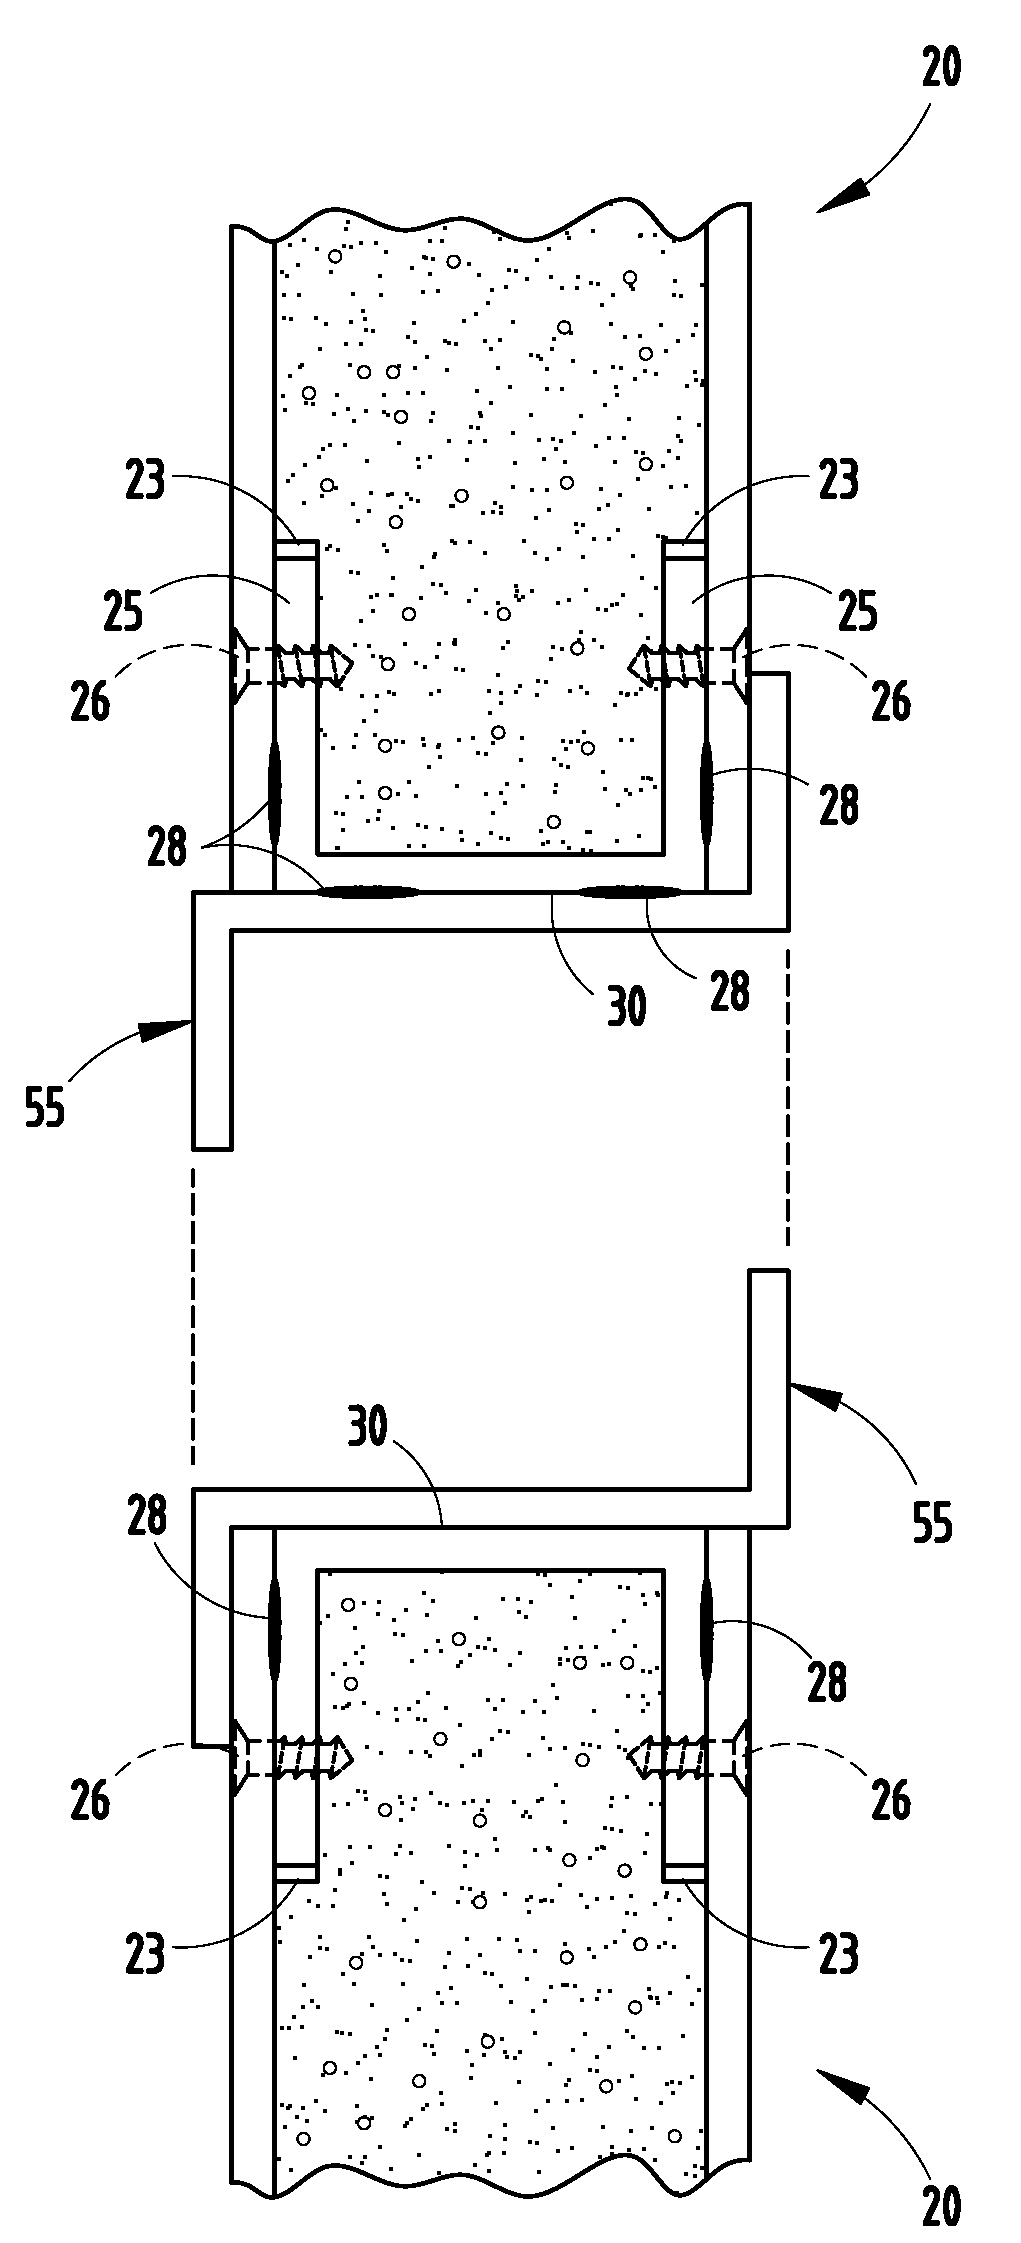 Structural insulated panel system including junctures